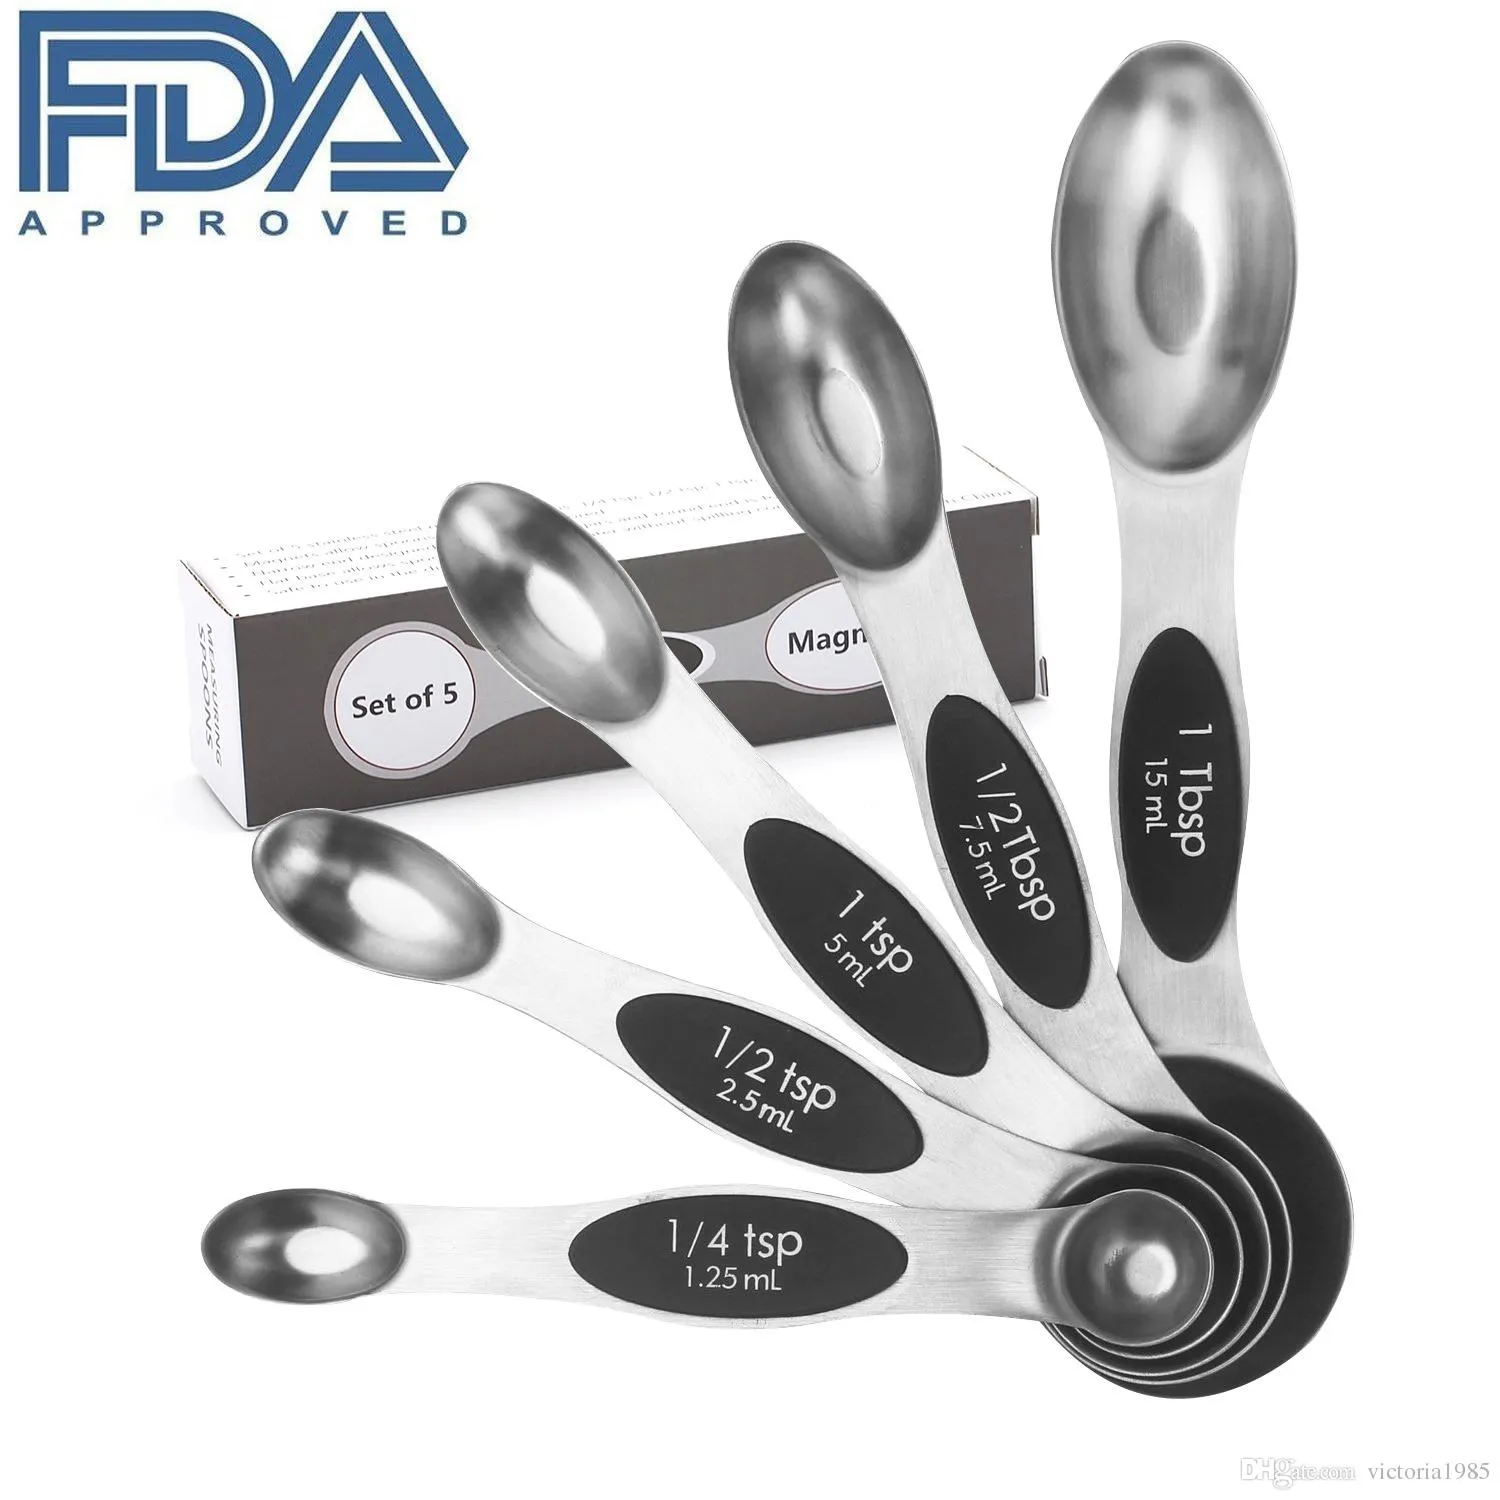 4pcs Measuring Spoons Set, Premium Stainless Steel Metal Spoon Set, Tablespoon and Teaspoon, for Accurate Measure Liquid or Dry Ingredients, for